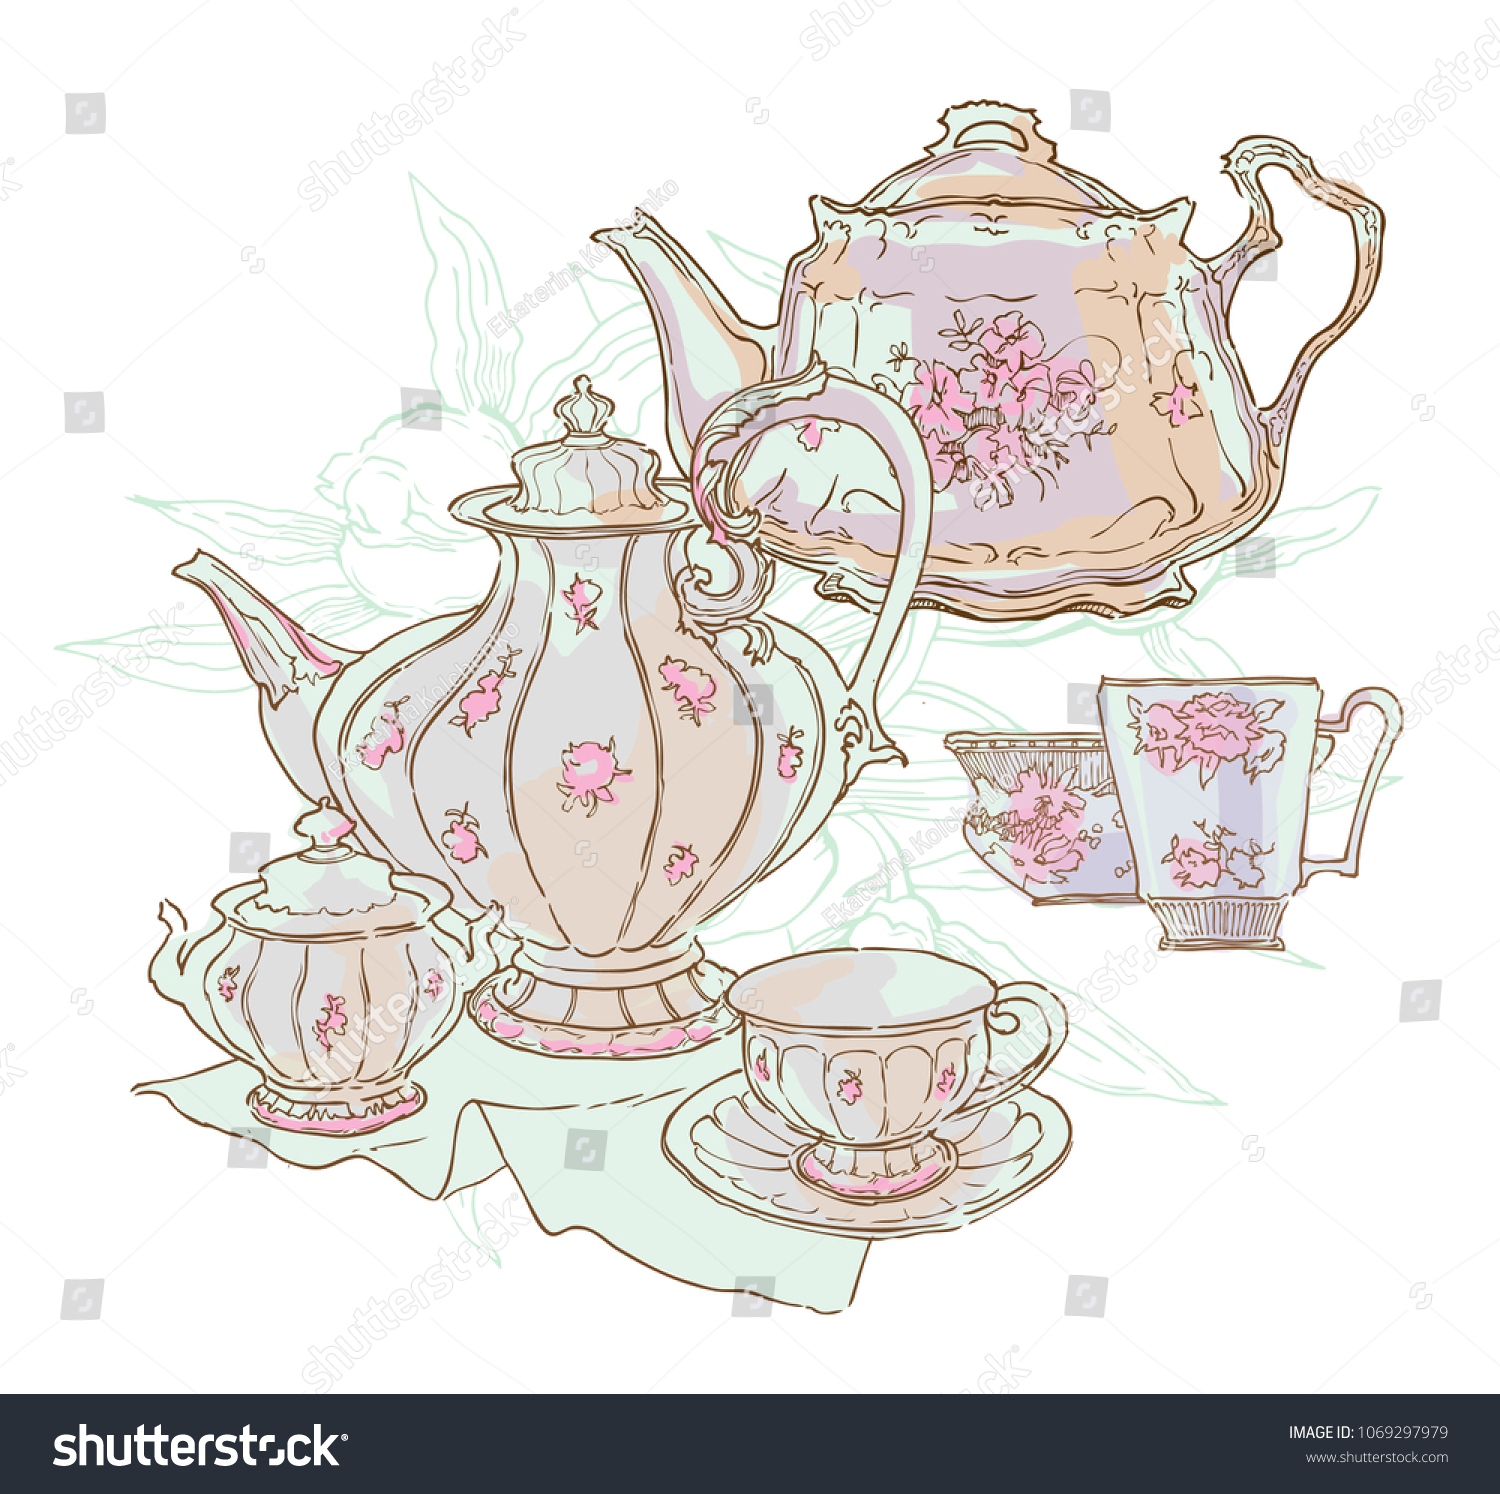 Vintage tea set service vector illustration. Teapot and cups drawing. Cosy table set. Floral illustration. #1069297979